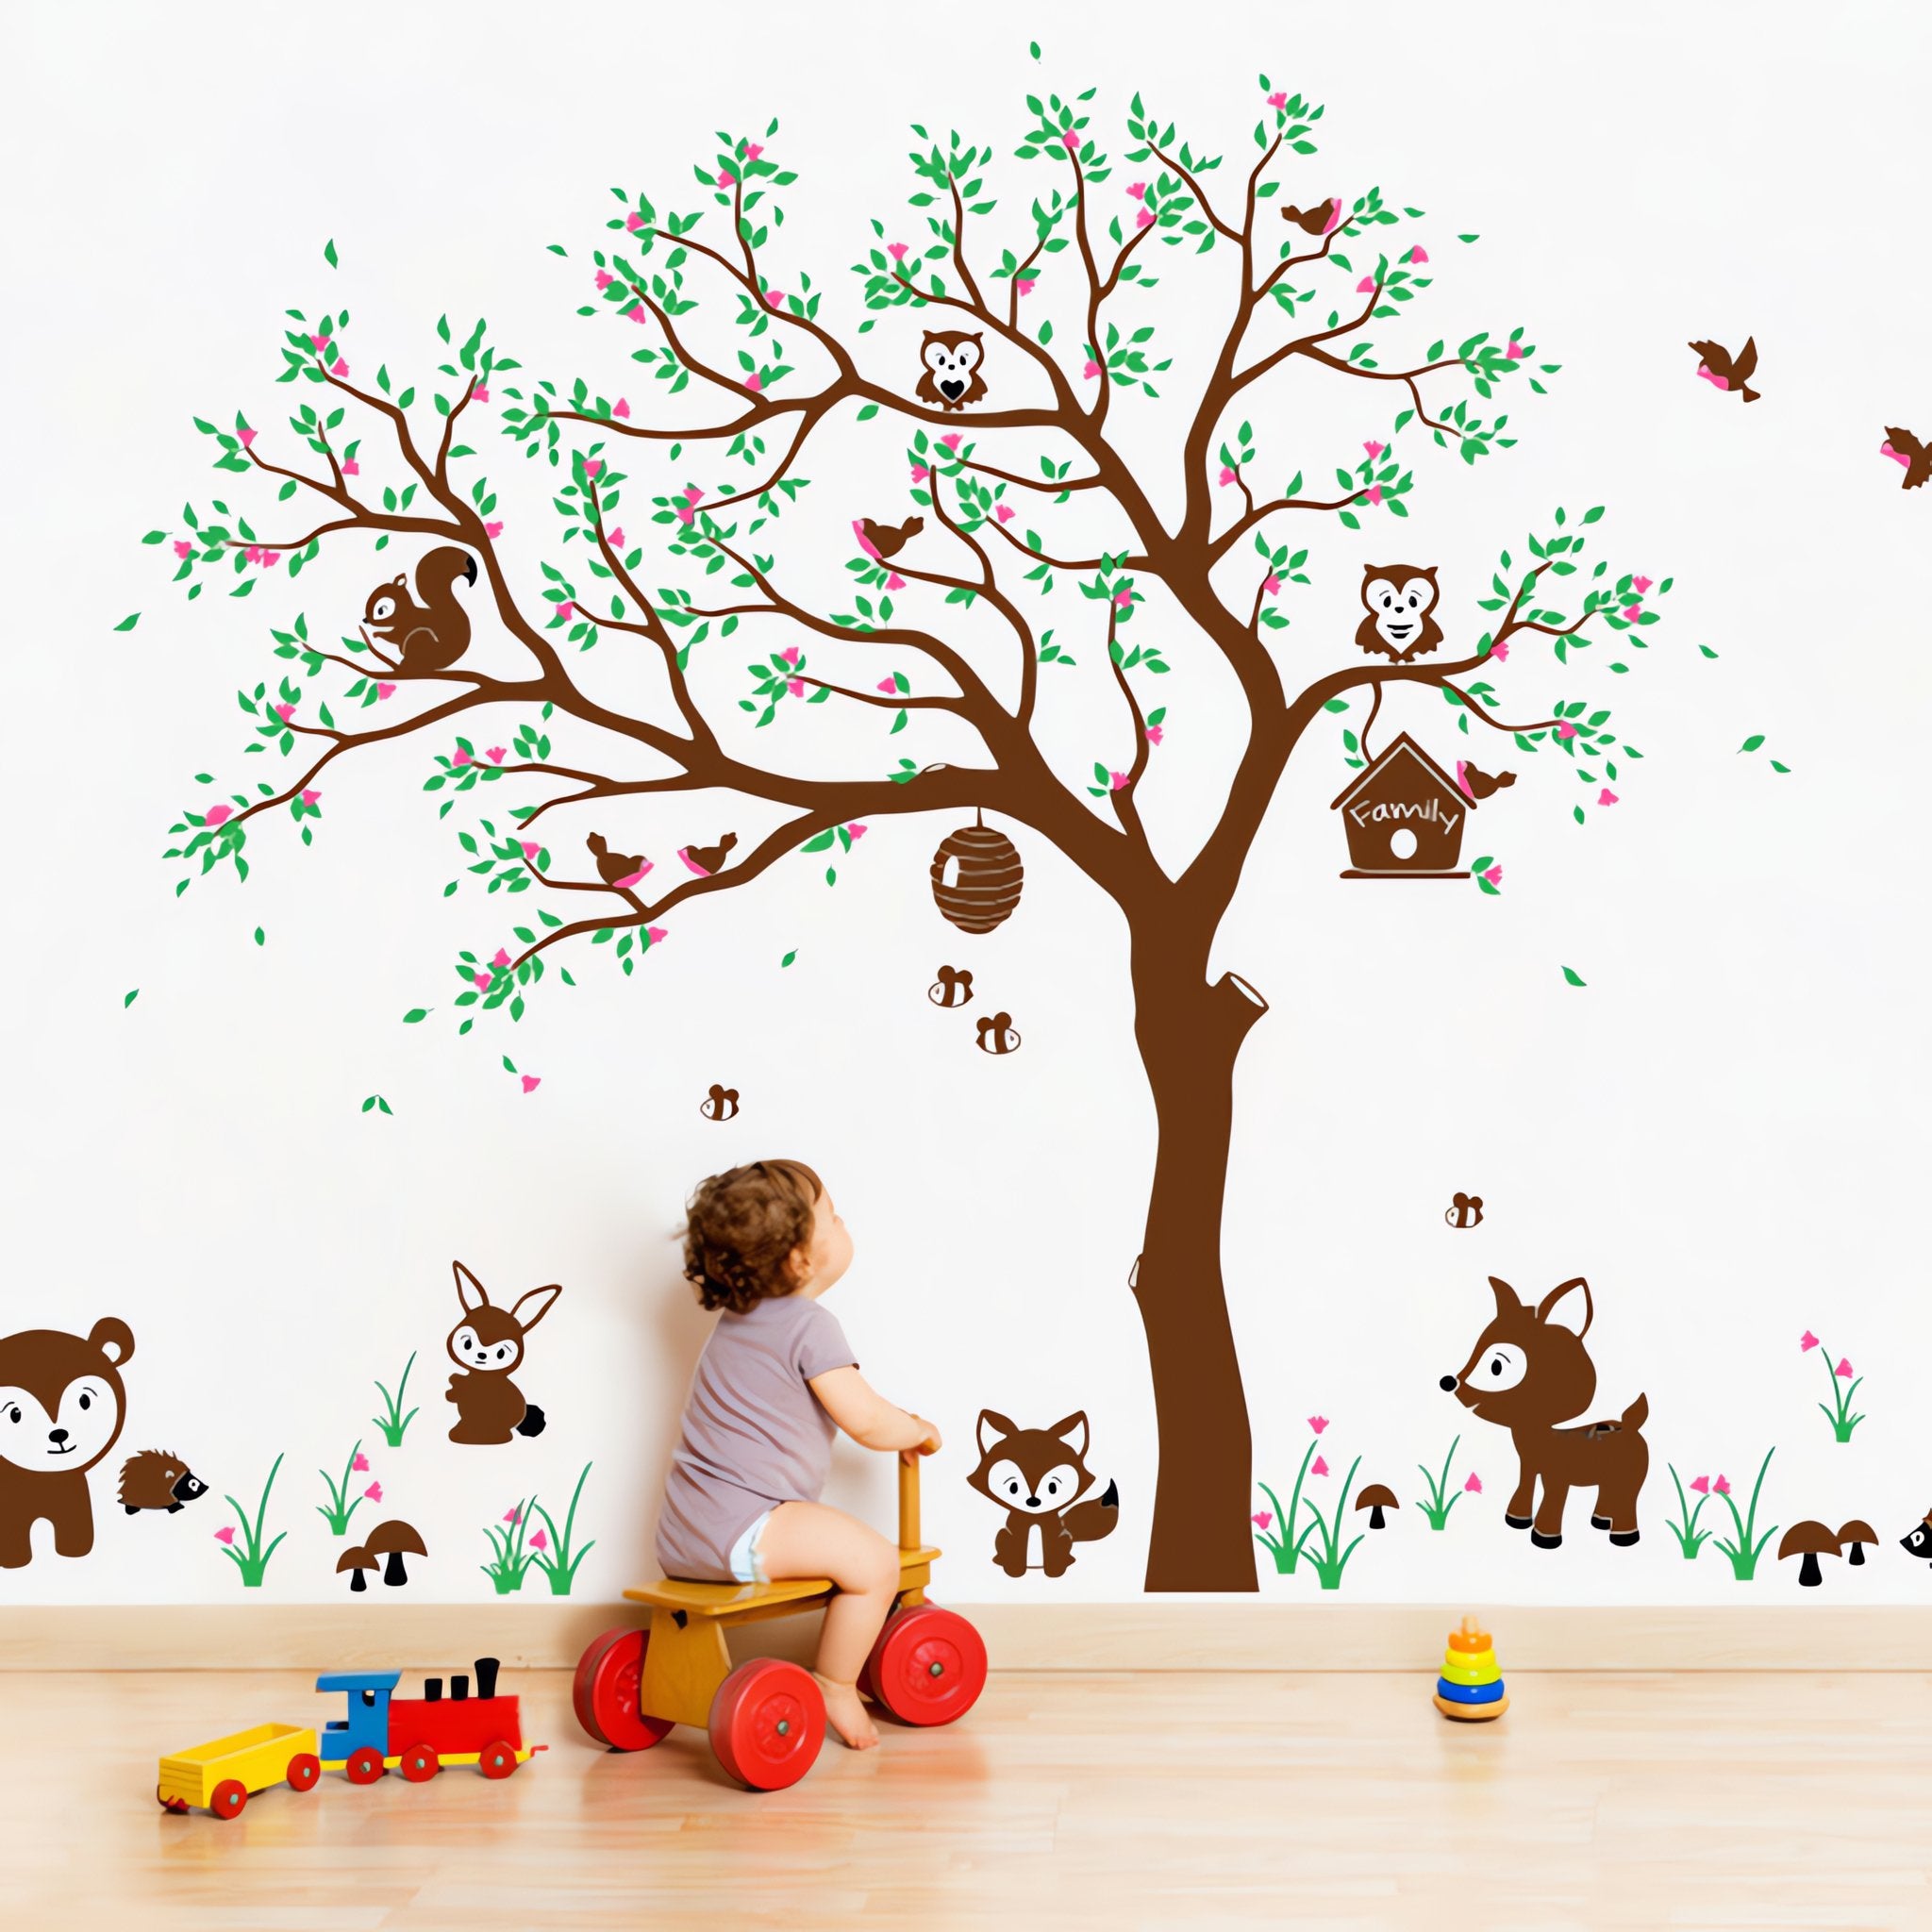 Tree wall sticker with animals in a nursery with a baby playing and various toys.